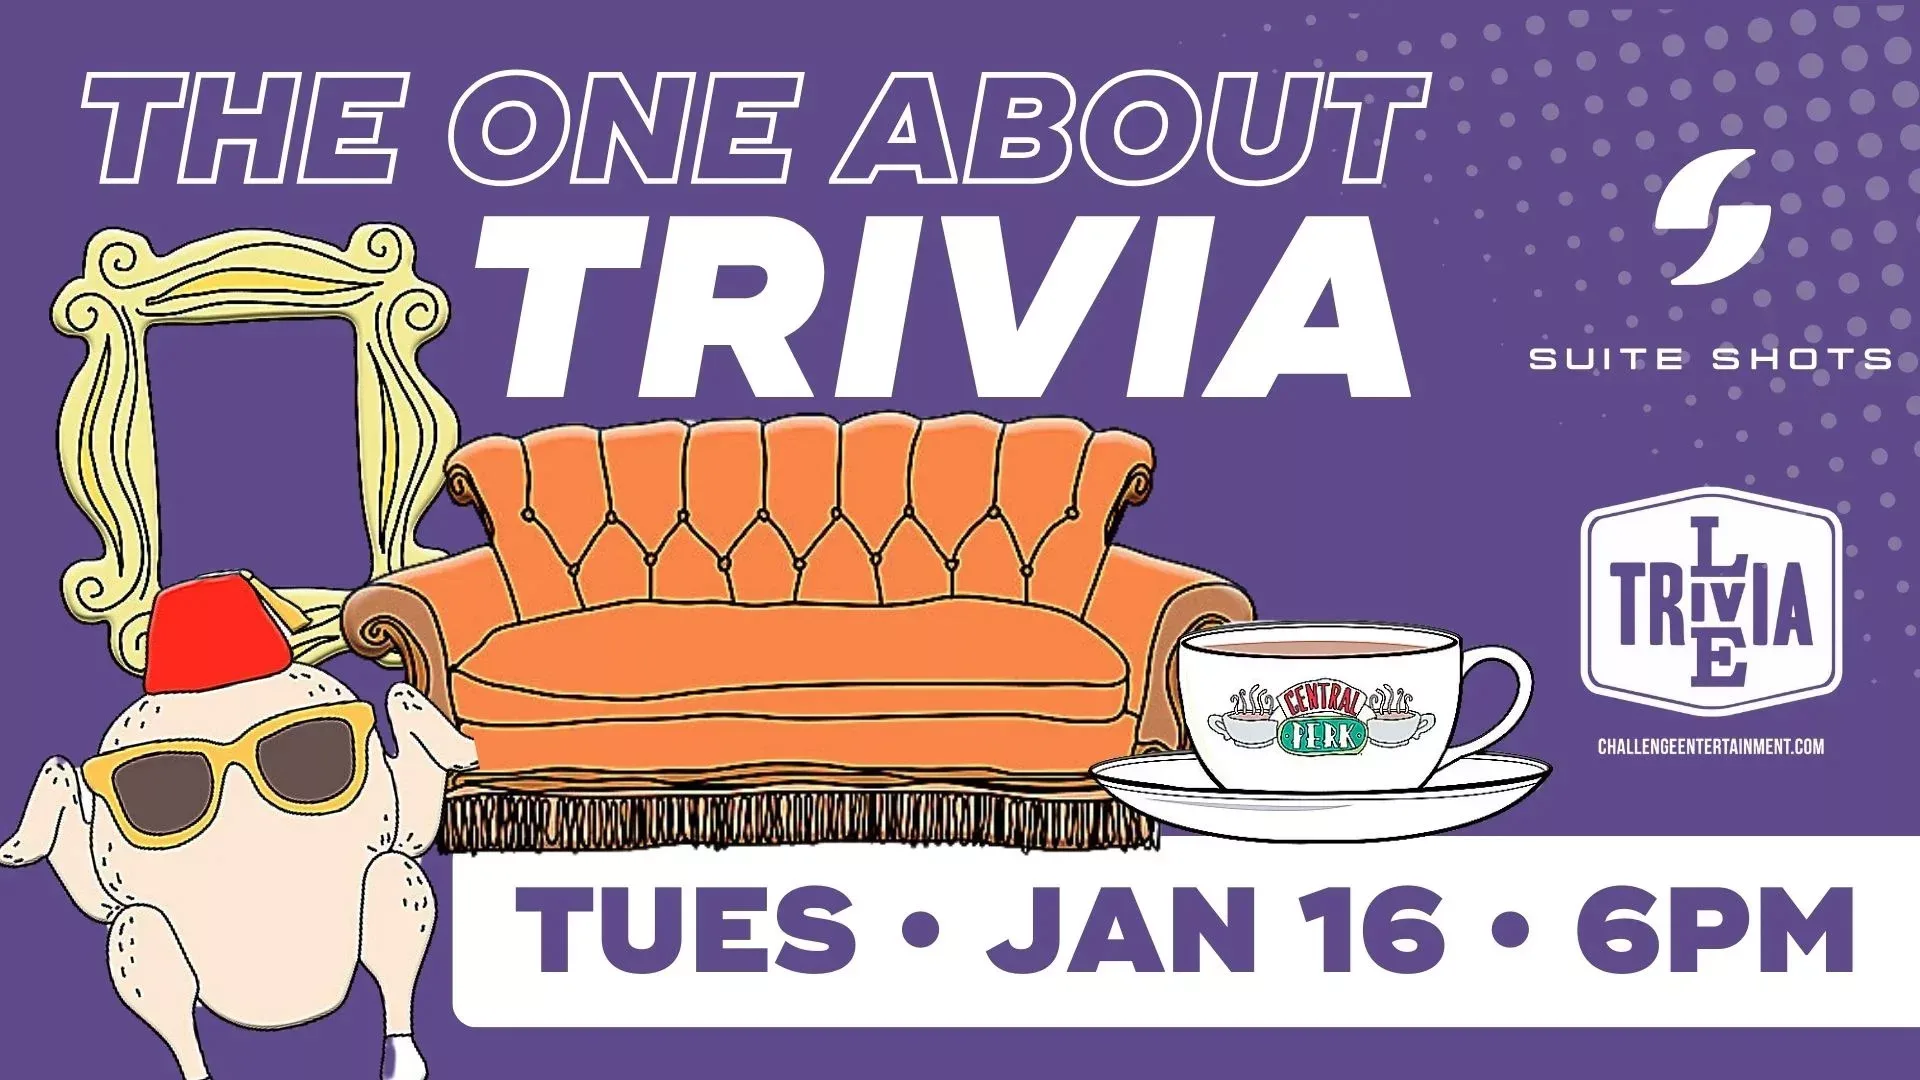 “The One About Trivia” – FREE Trivia Night